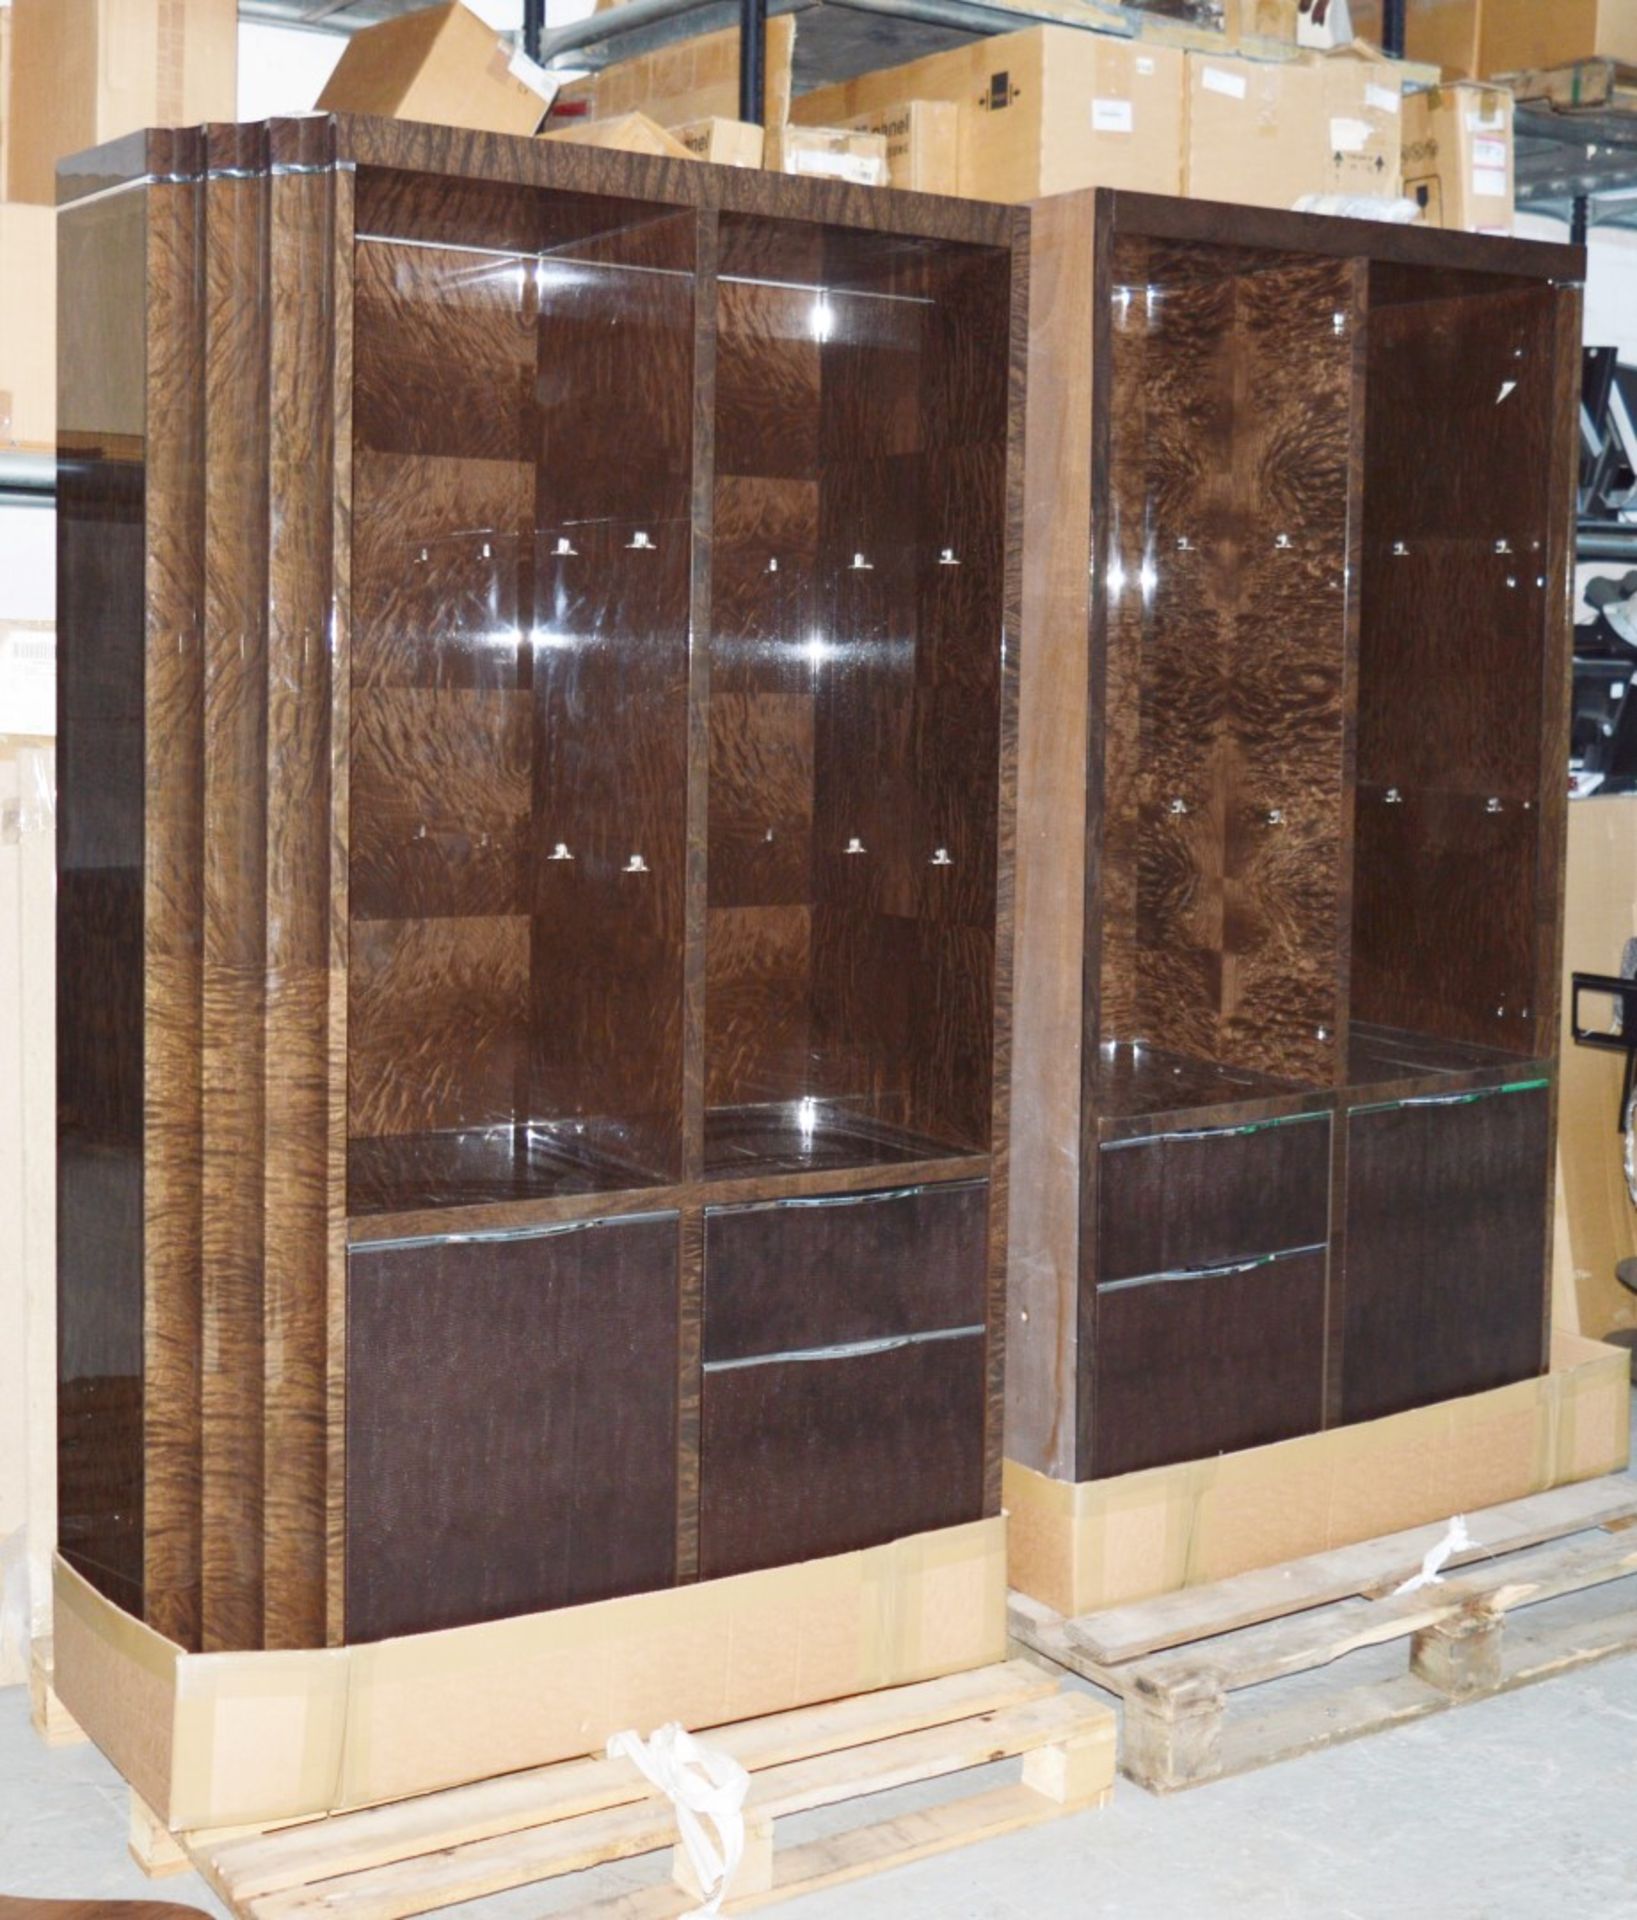 1 x Giorgio Absolute Double Bookcase 4084 – Mako Japanese Tamos Burl Veneer With a High Gloss Finish - Image 13 of 14